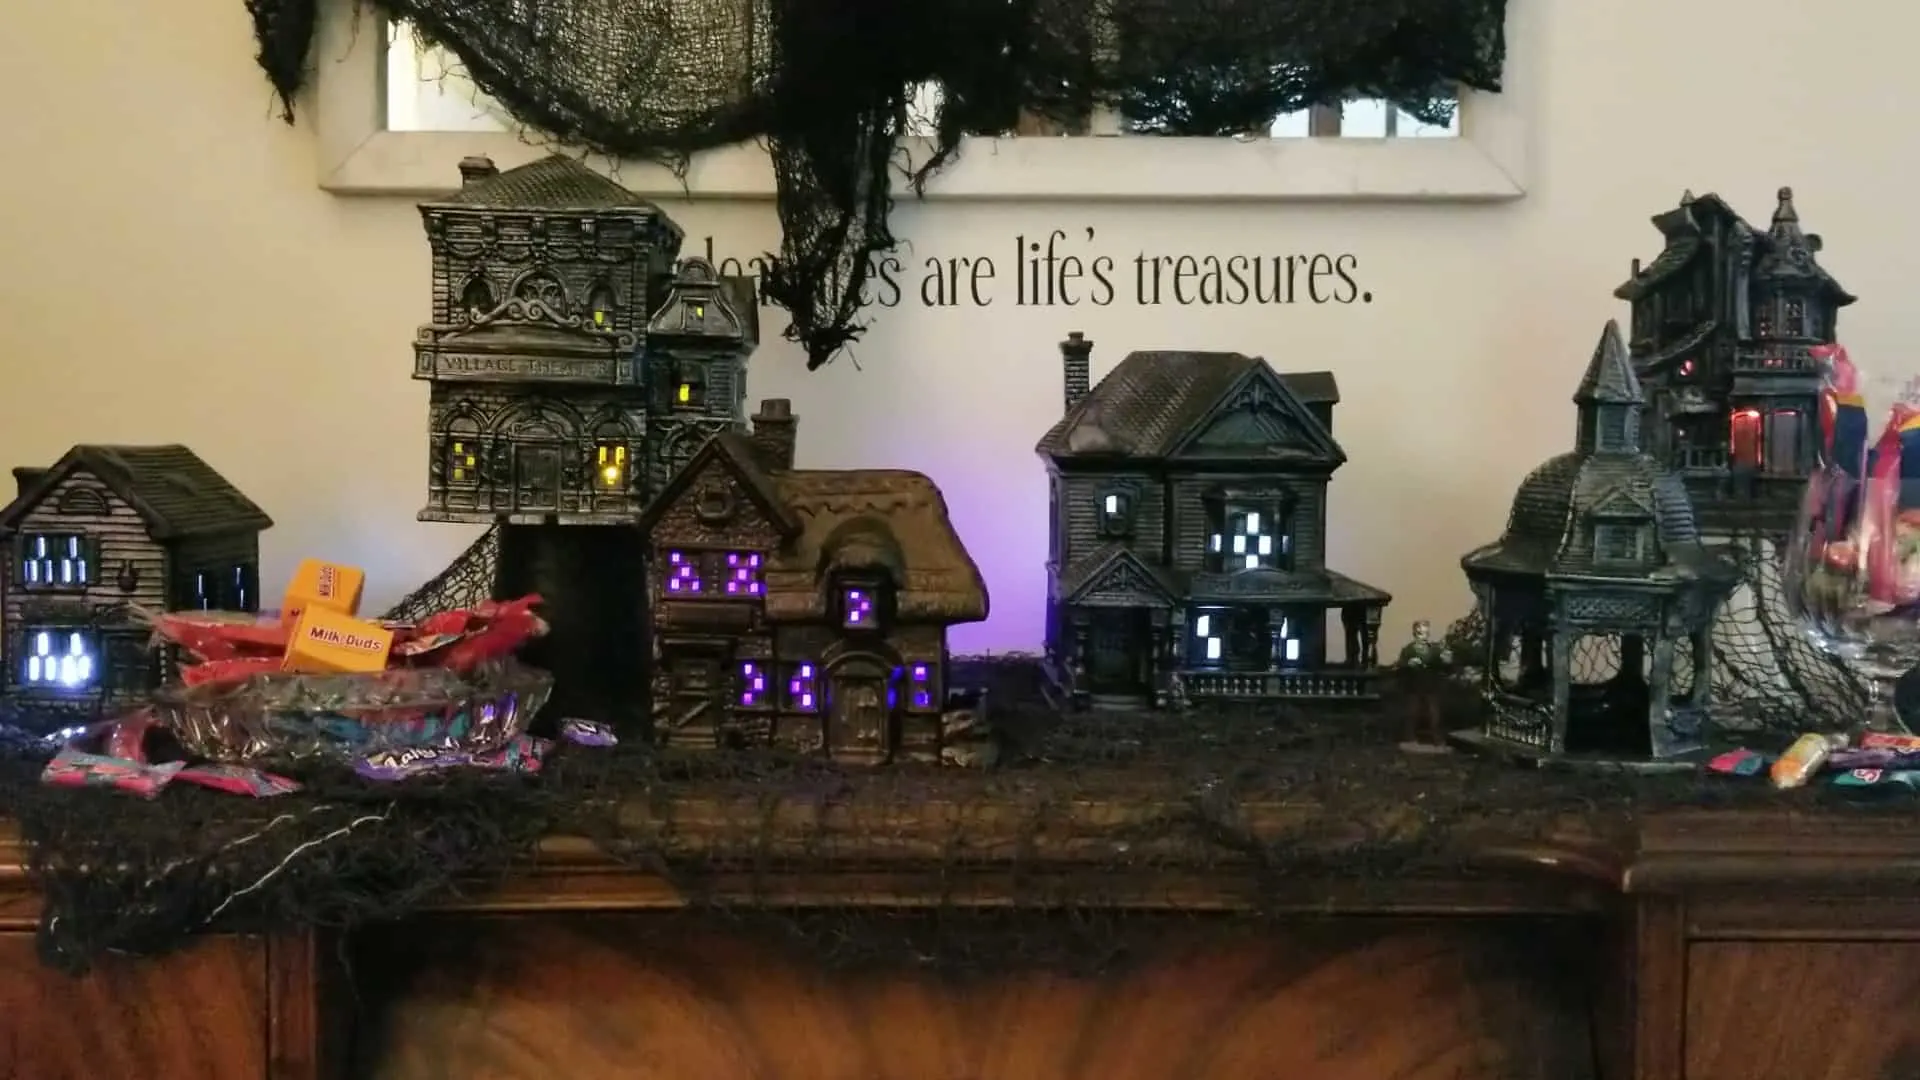 Final spooky Halloween village with lights.